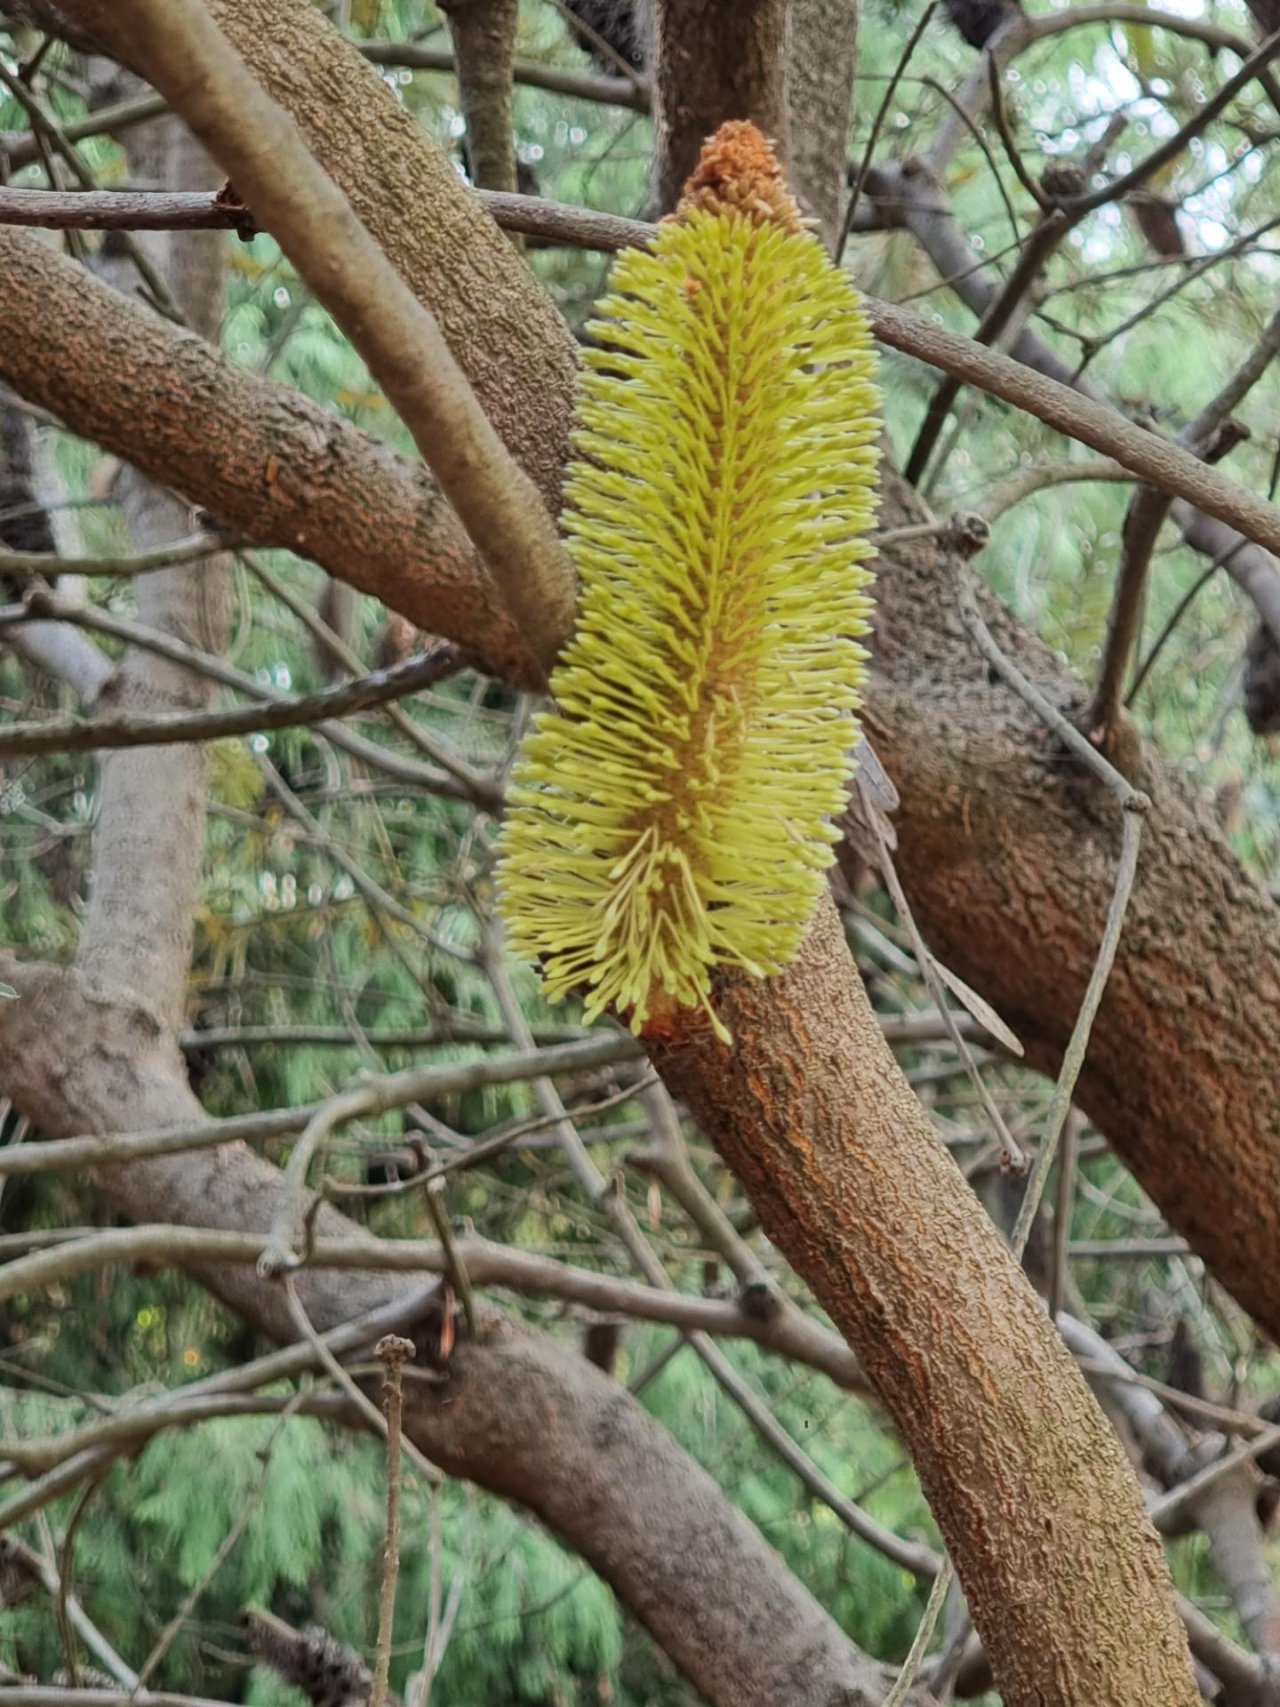 Coastal Banksia in ClimateWatch App spotted by Lea Levy on 11.03.2021